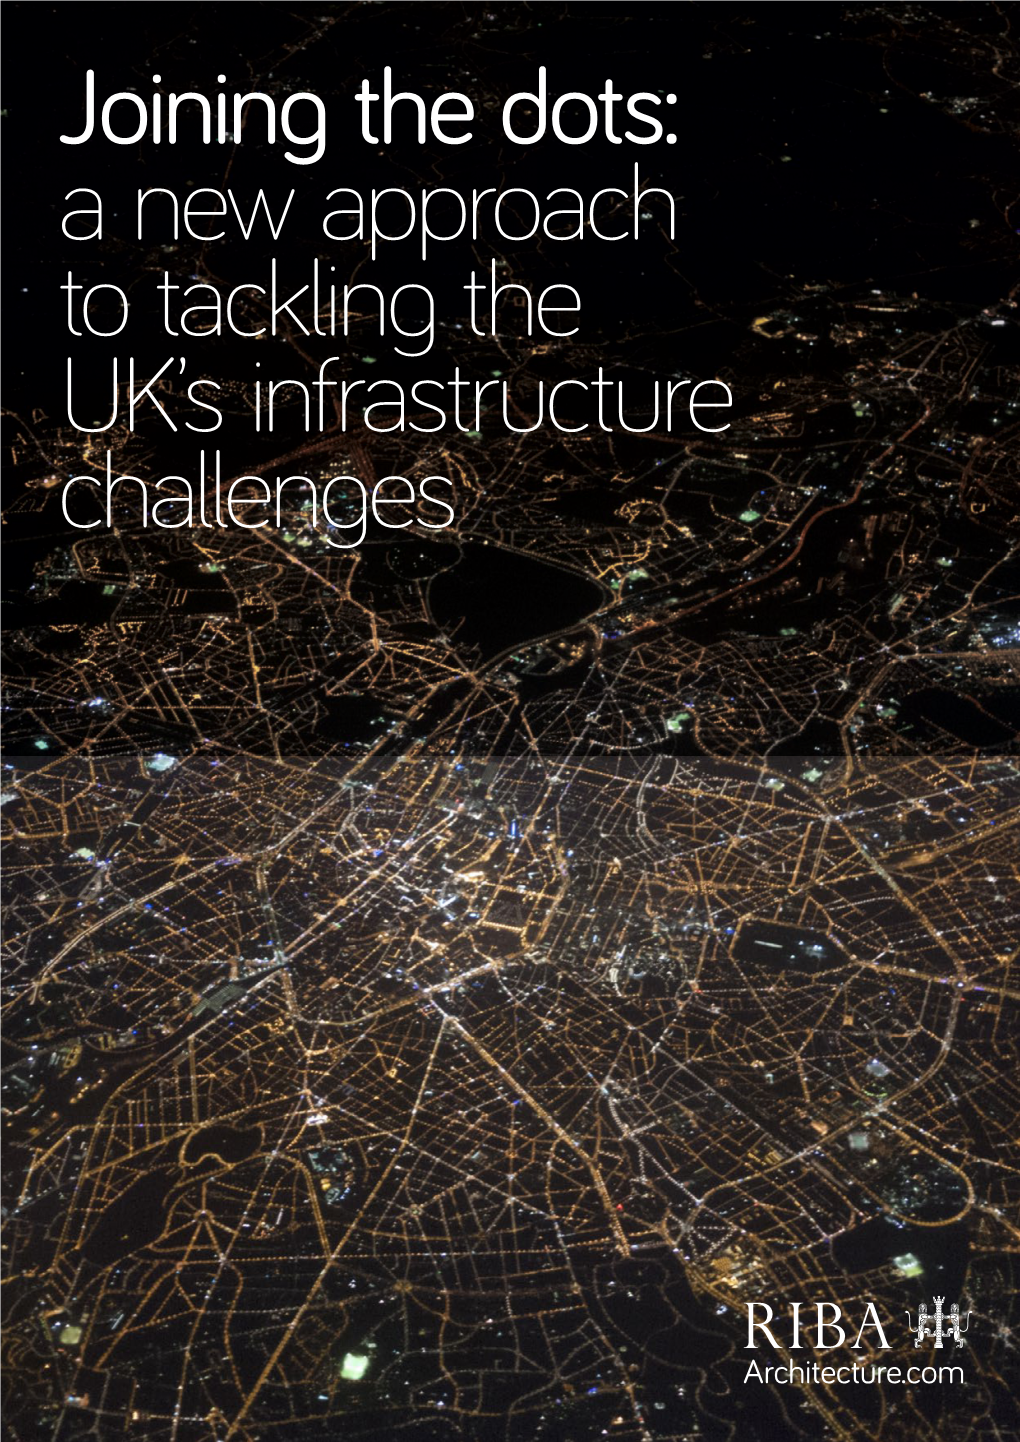 A New Approach to Tackling the UK's Infrastructure Challenges